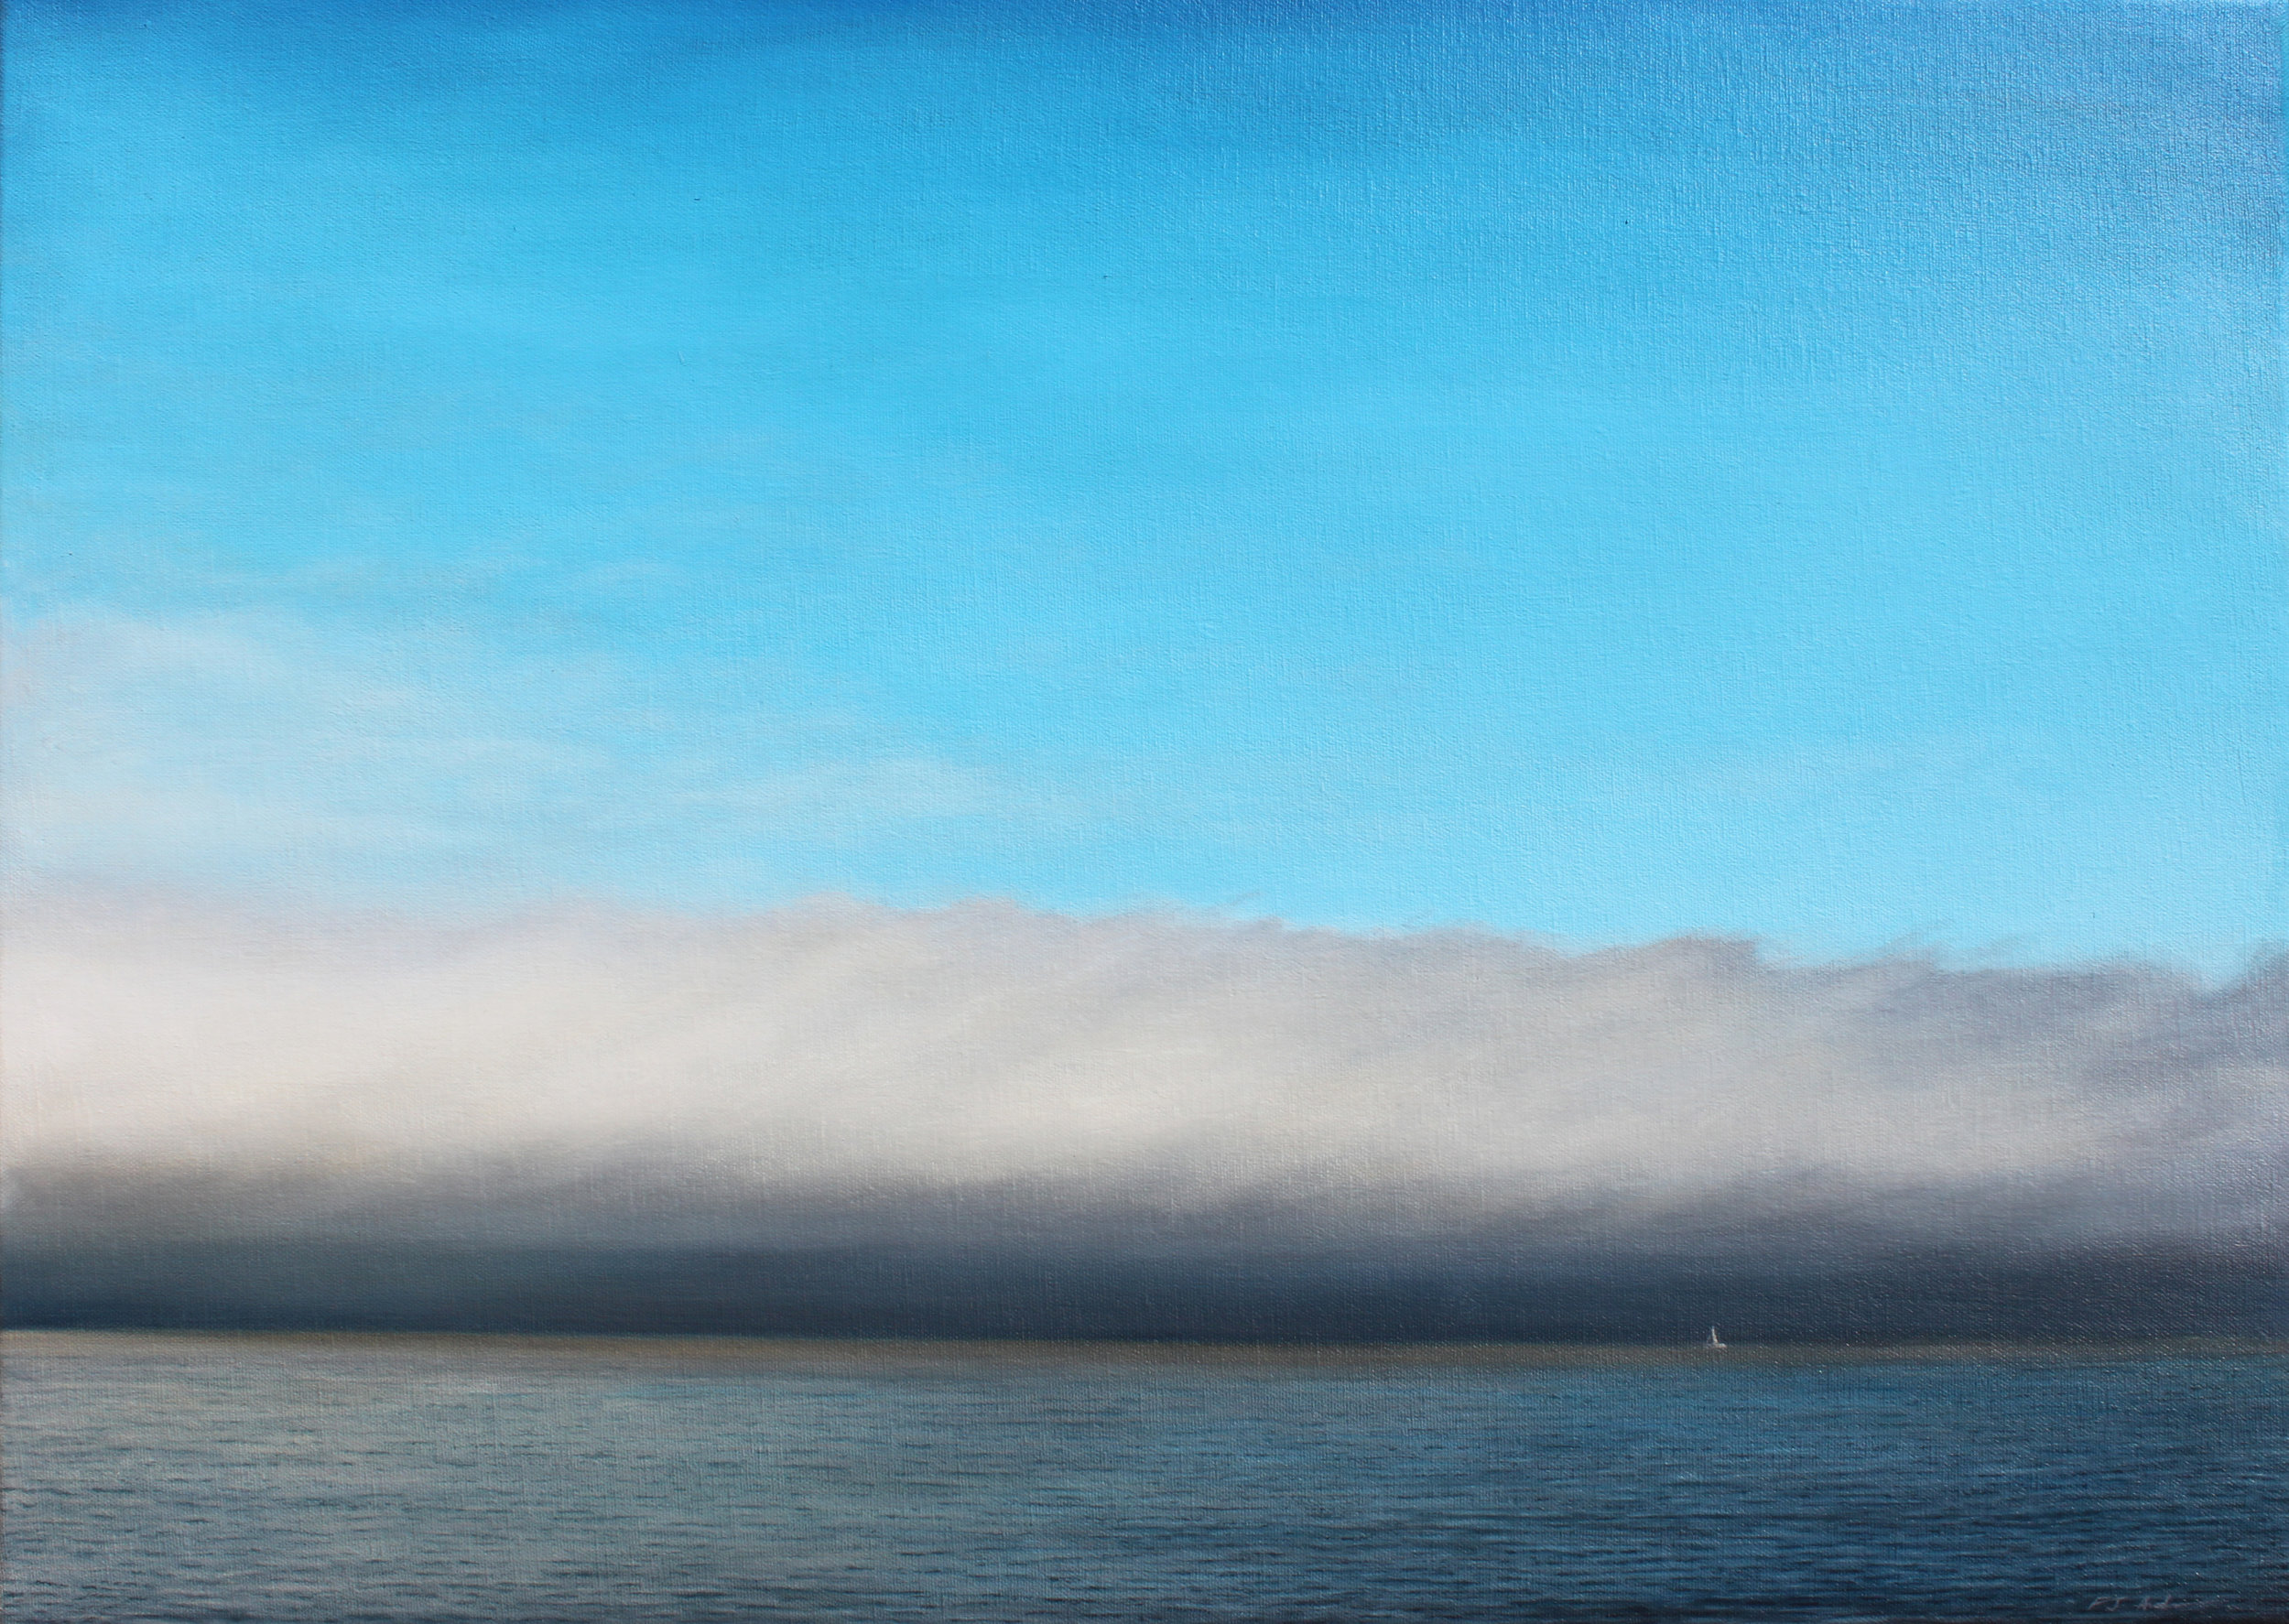  “Fog Bank”   Oil on Canvas    20"x28"    Original-Sold    Prints Available    